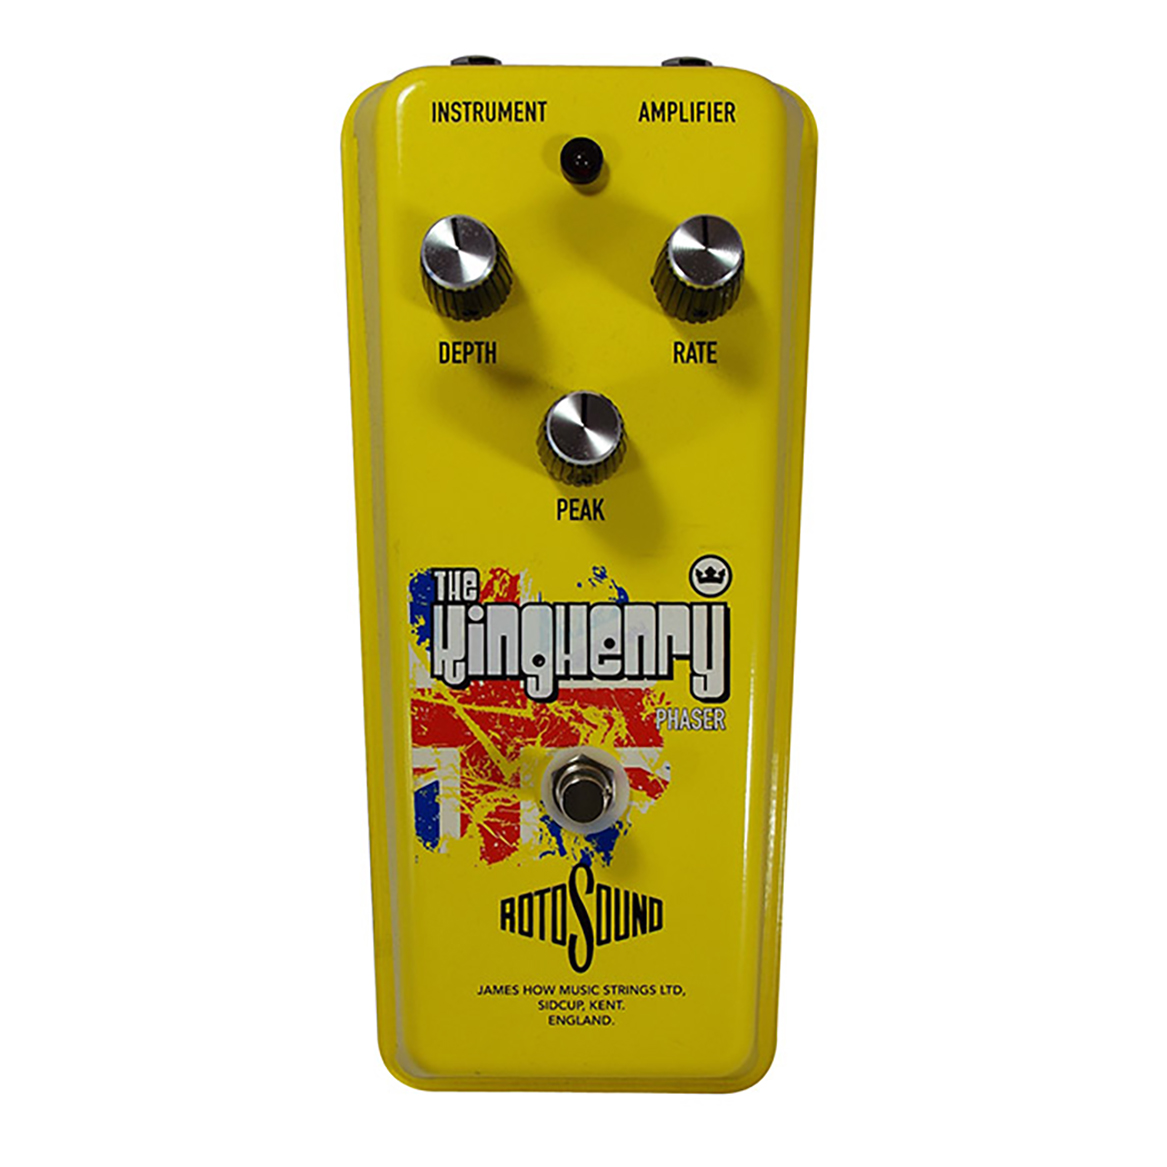 Rotosound King Henry Phaser effects pedal